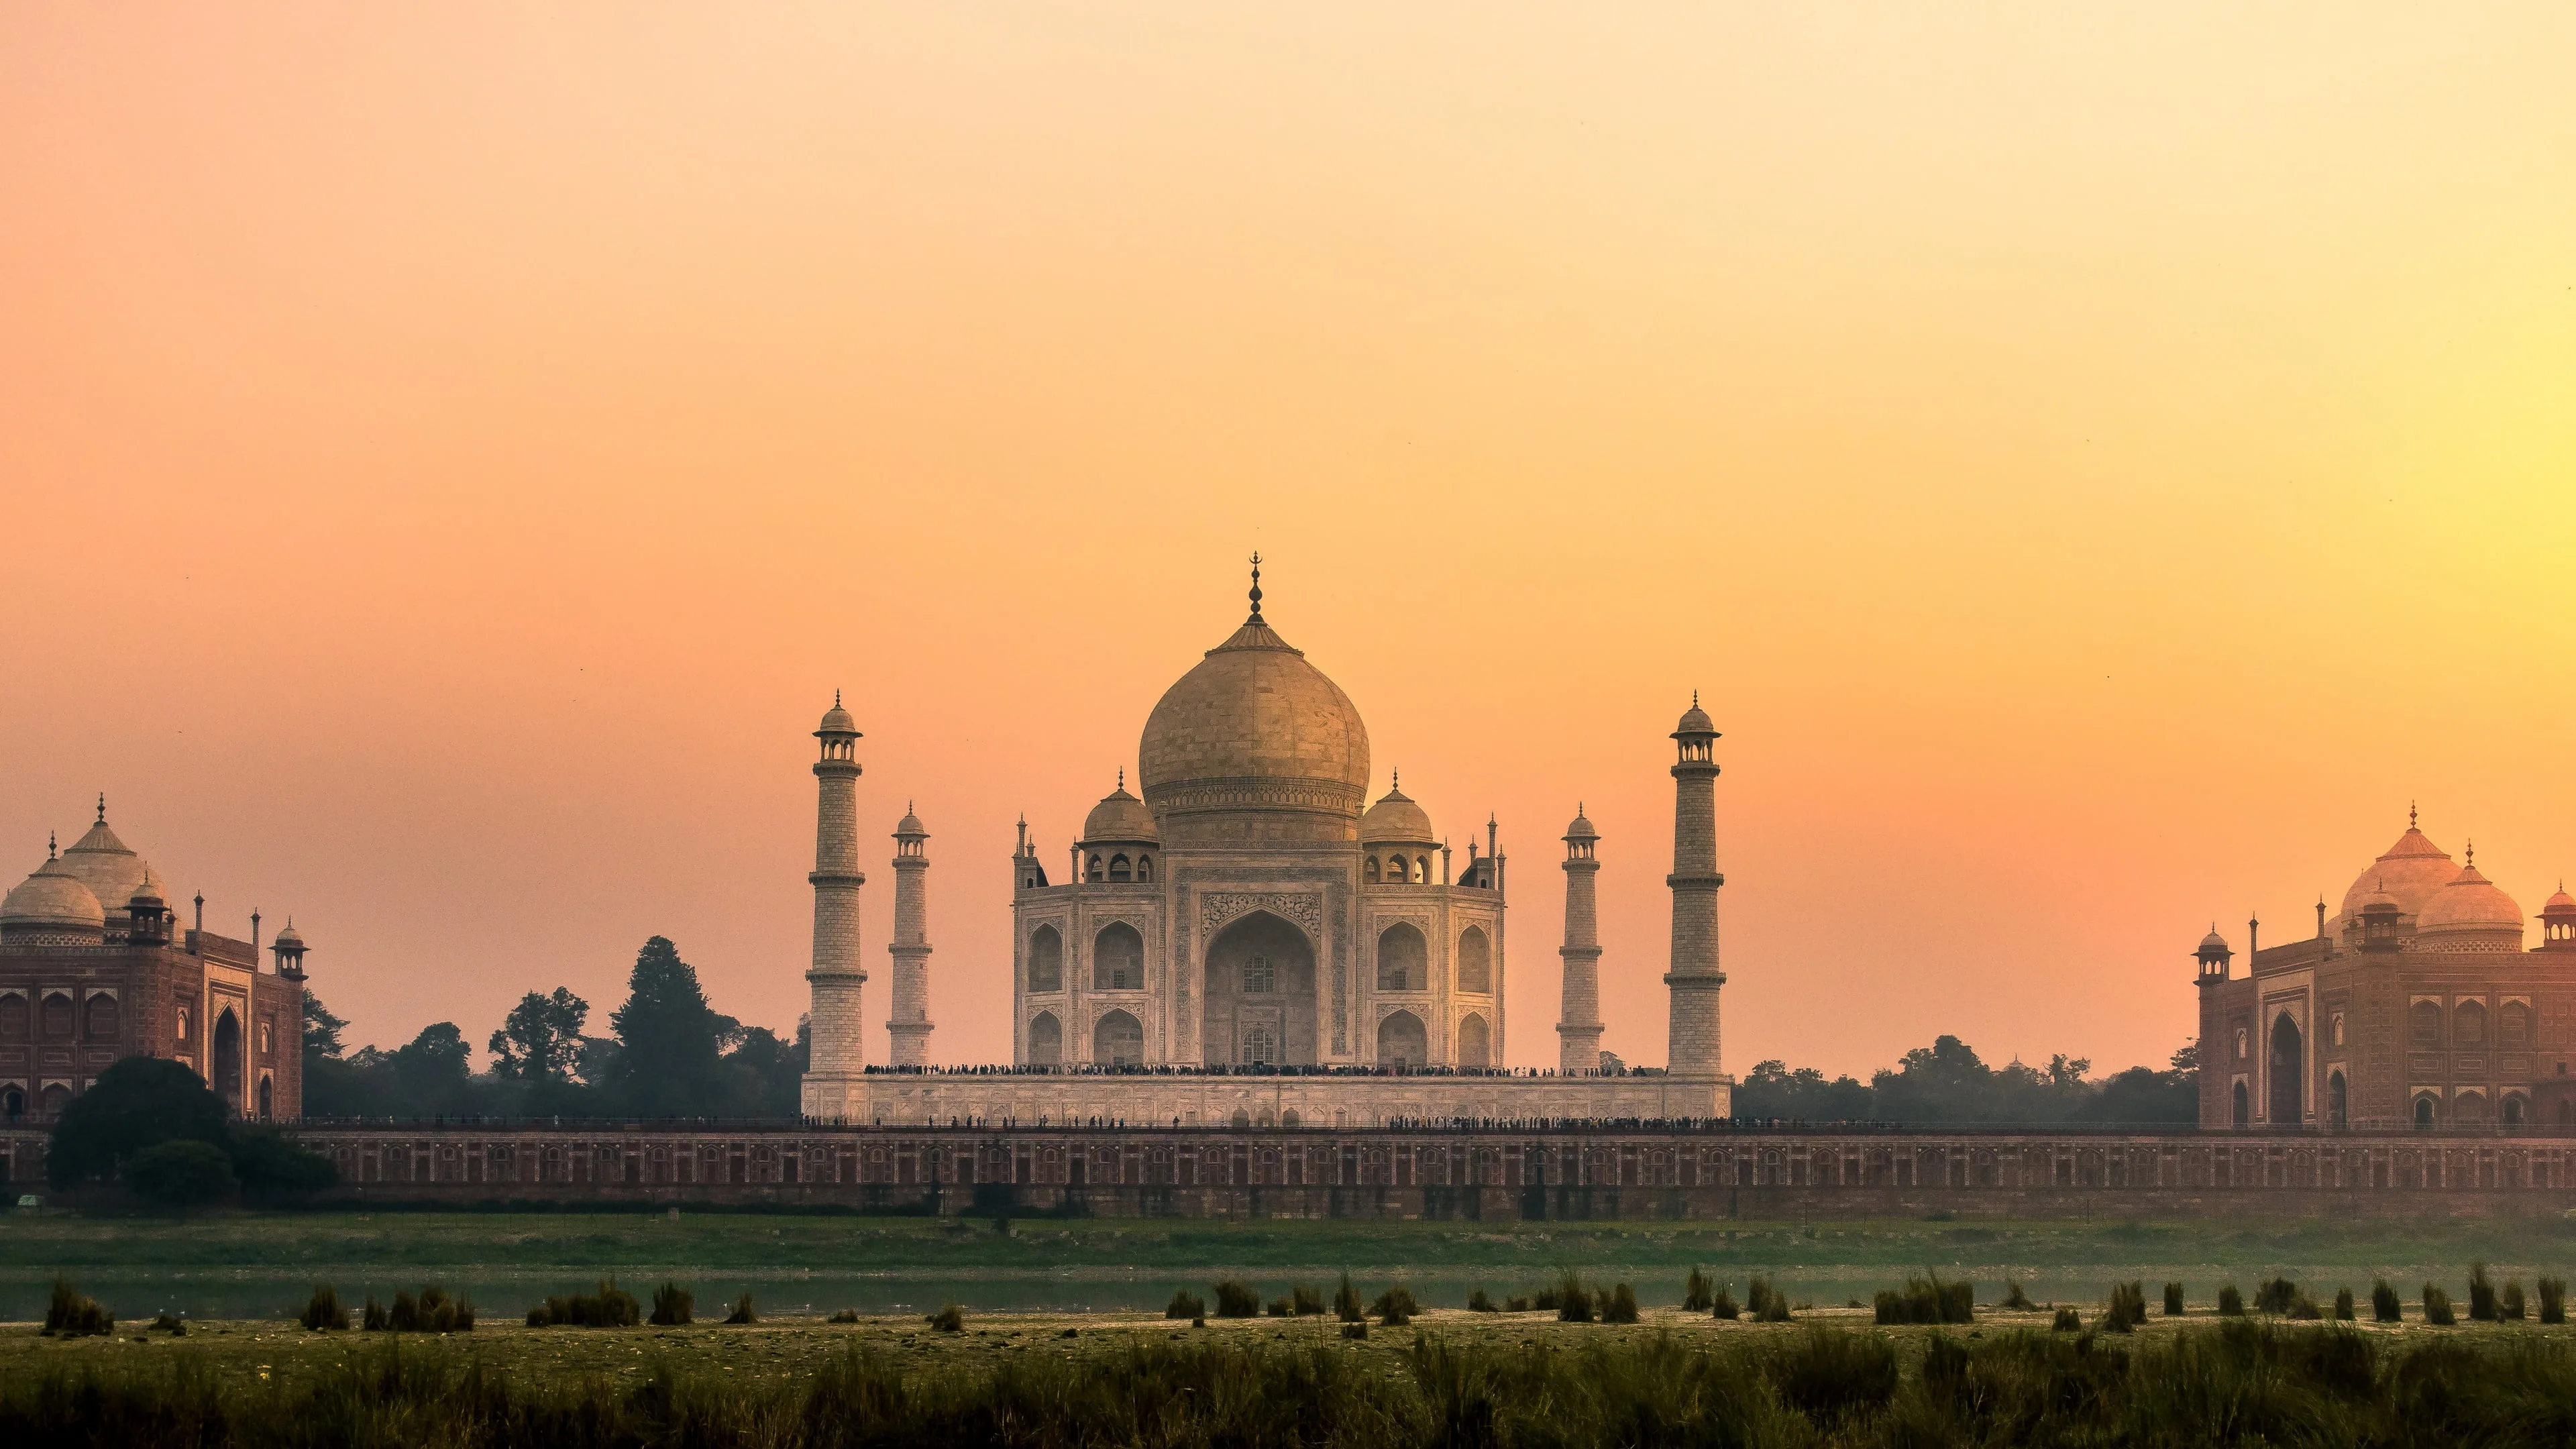 Get mesmerized by the stunning 4K resolution of the Taj Mahal landscape scenery wallpaper. This breathtaking wallpaper captures the intricate architecture and historical significance of this monumental site, set against a beautiful scenic background.